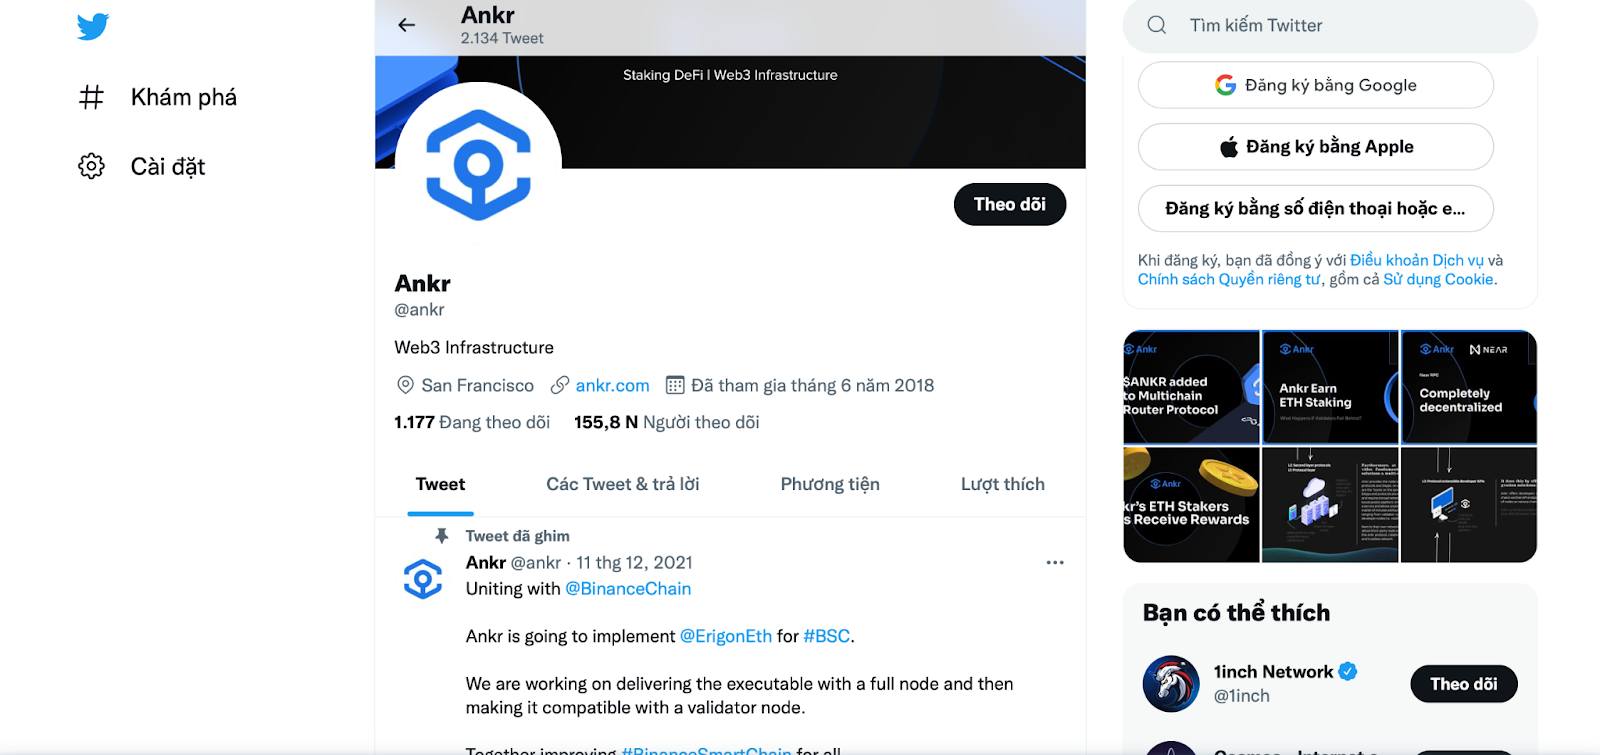 Cộng đồng twitter của Ankr coin